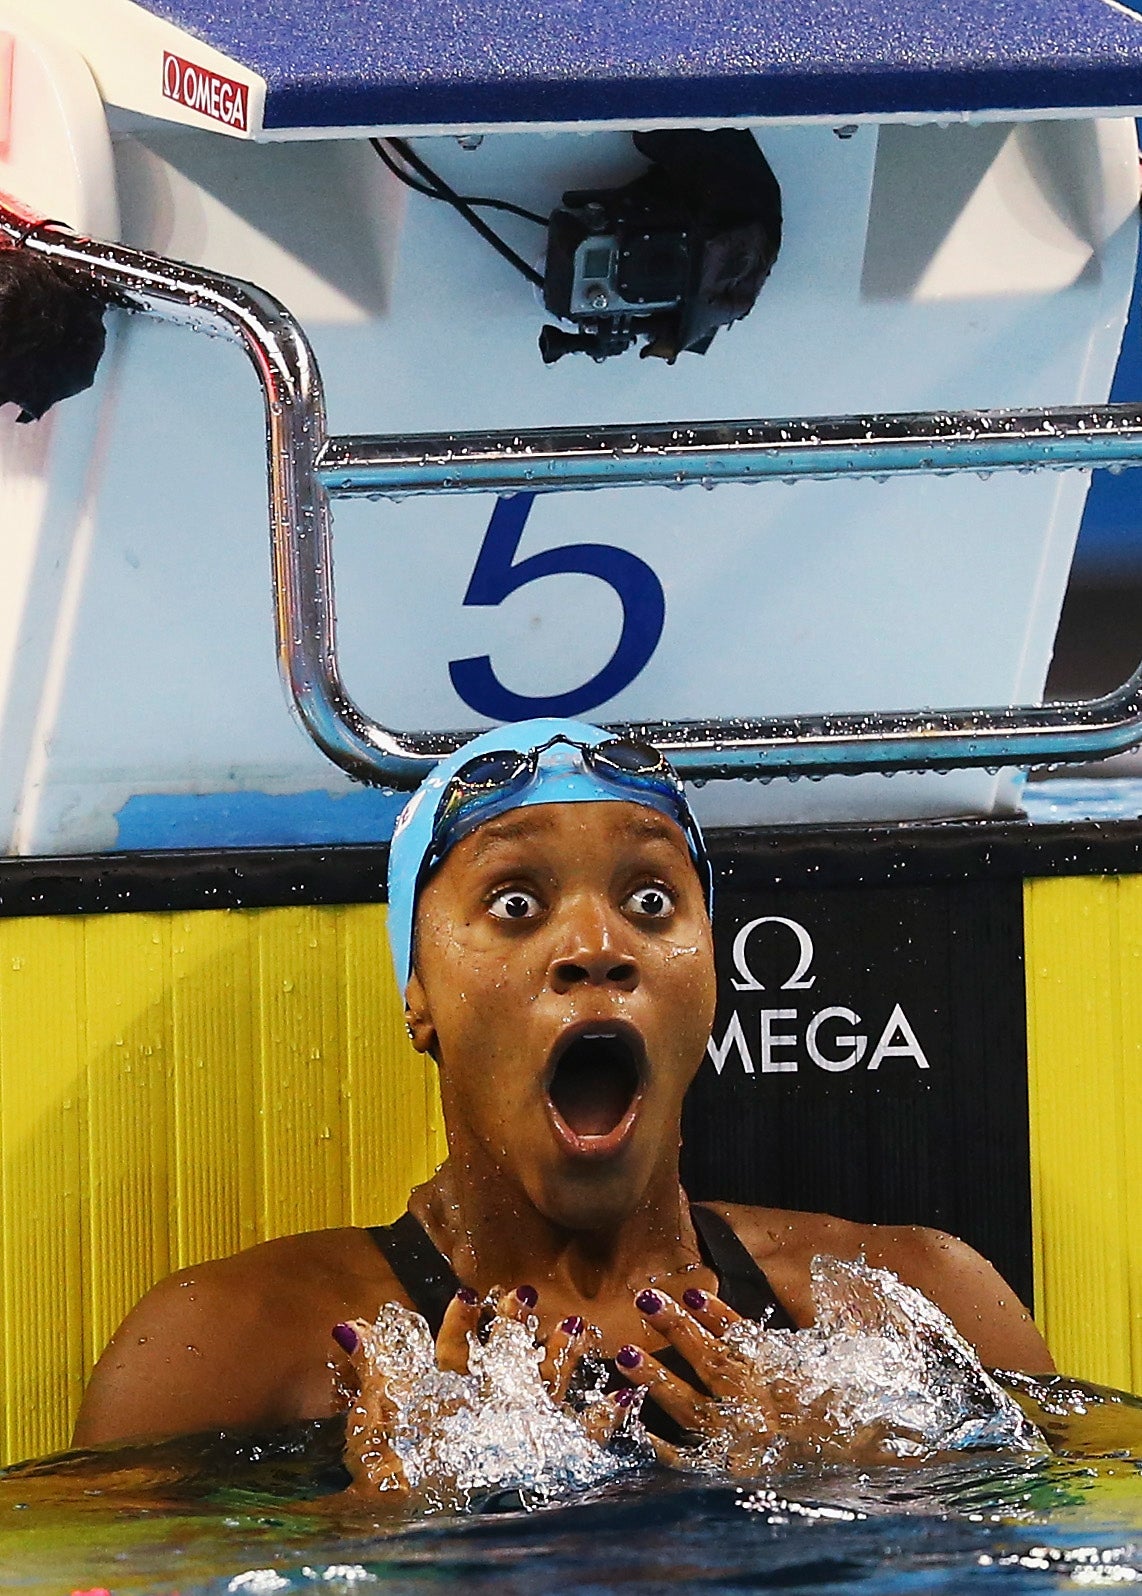 Jamaican Swimmer Becomes First Black Woman to Win World Swimming Title